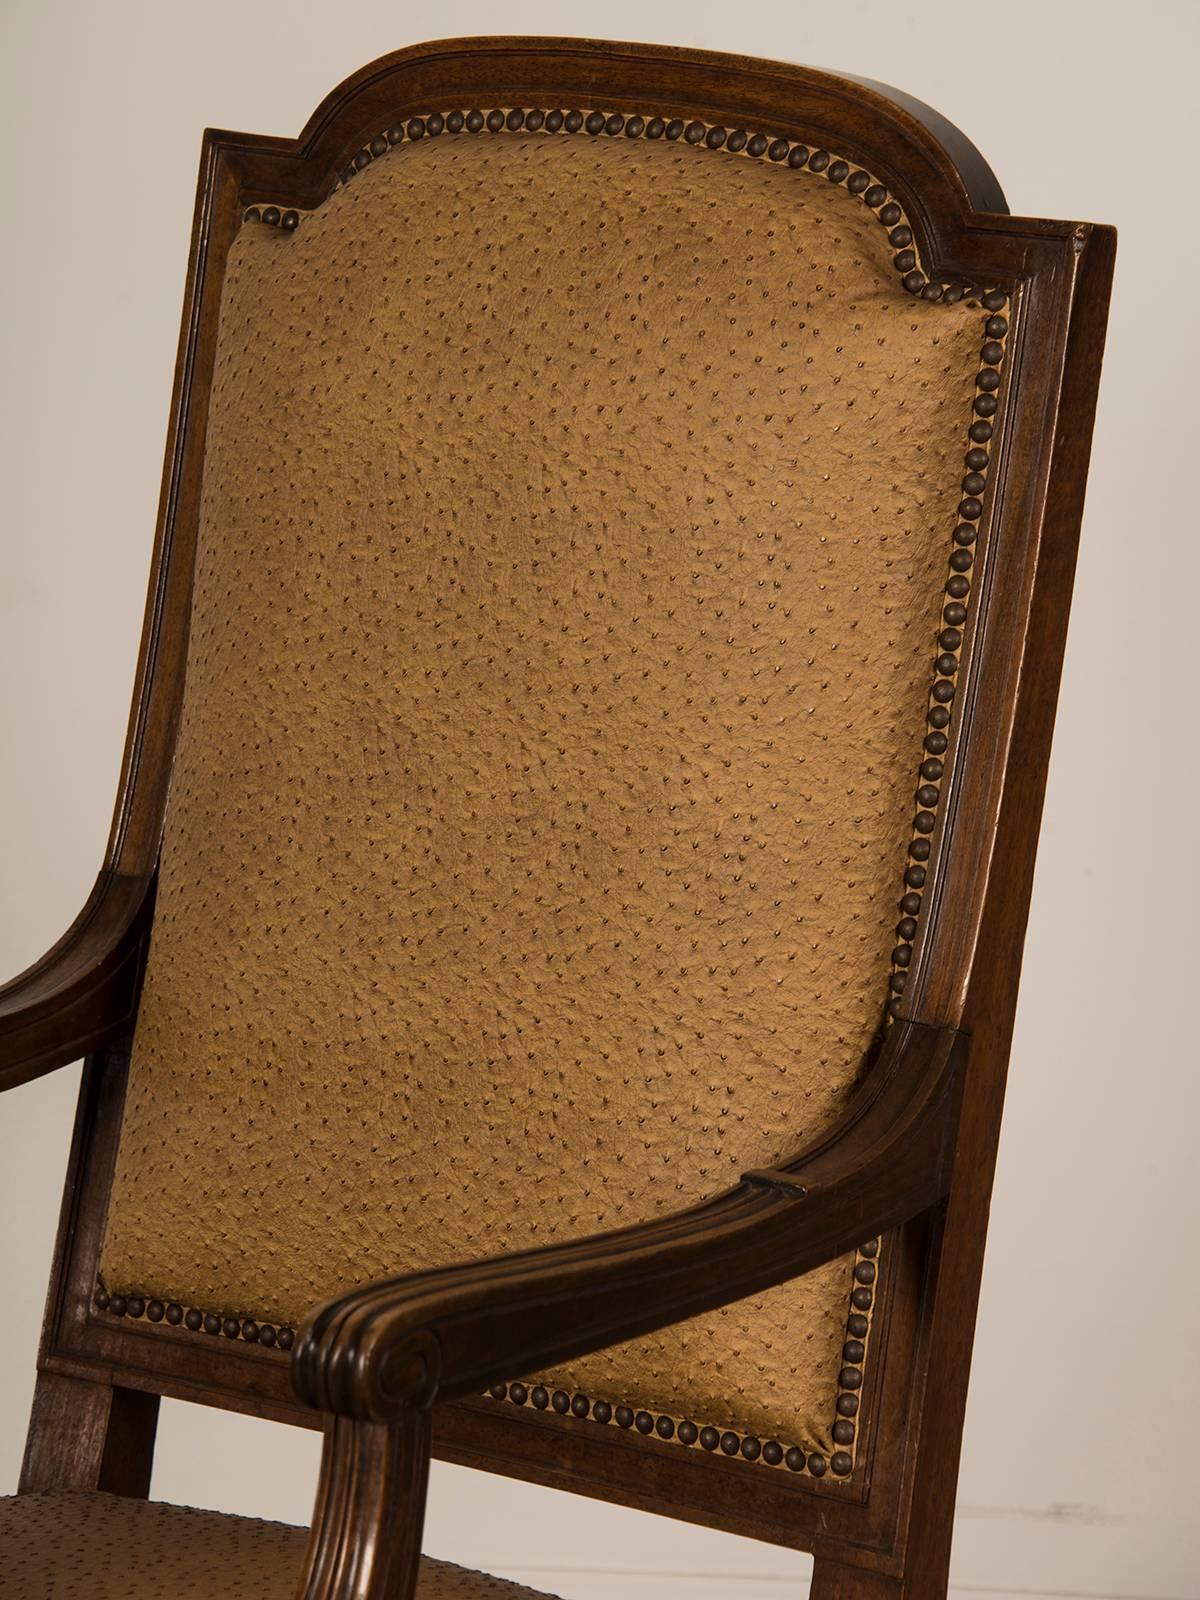 Receive our new selections direct from 1stdibs by email each week. Please click follow dealer below and see them first!

Large antique French Louis XVI style walnut fauteuil, circa 1860 upholstered in a faux ostrich. Please notice the elegant